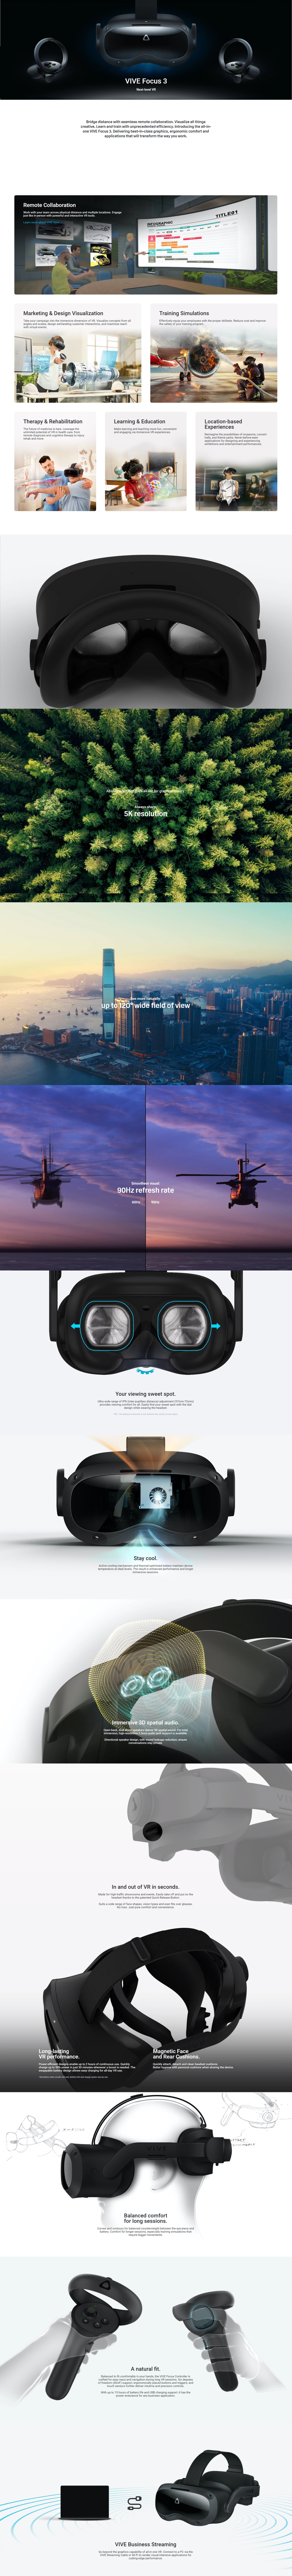 A large marketing image providing additional information about the product HTC VIVE Focus 3 Virtual Reality Headset - Additional alt info not provided